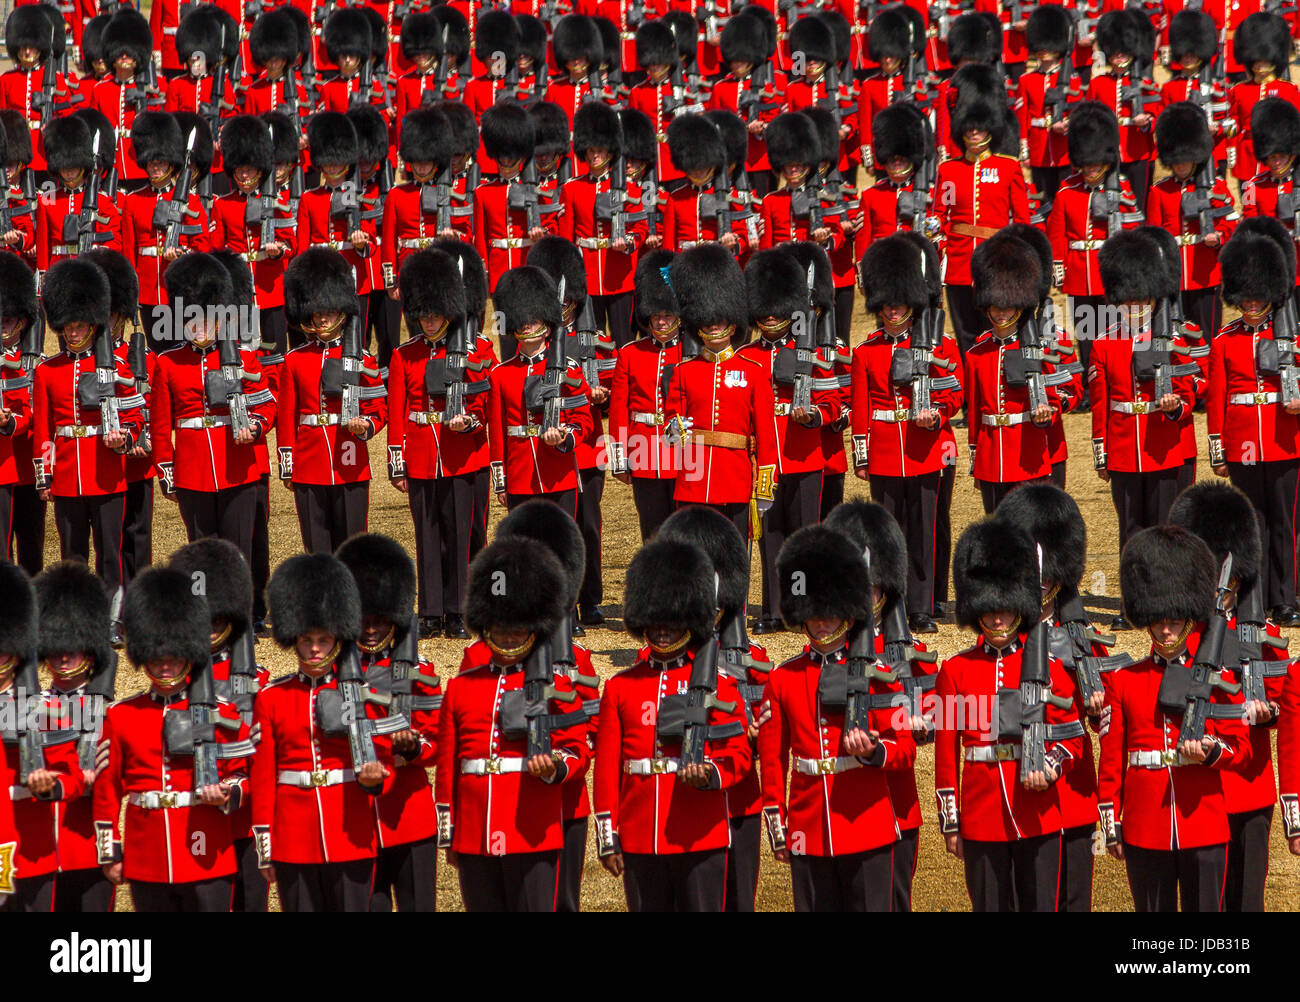 Soldiers of The Irish Guards marching at Trooping The Colour or Queens Birthday Parade at Horse Guards Parade, London, UK, 2017 Stock Photo